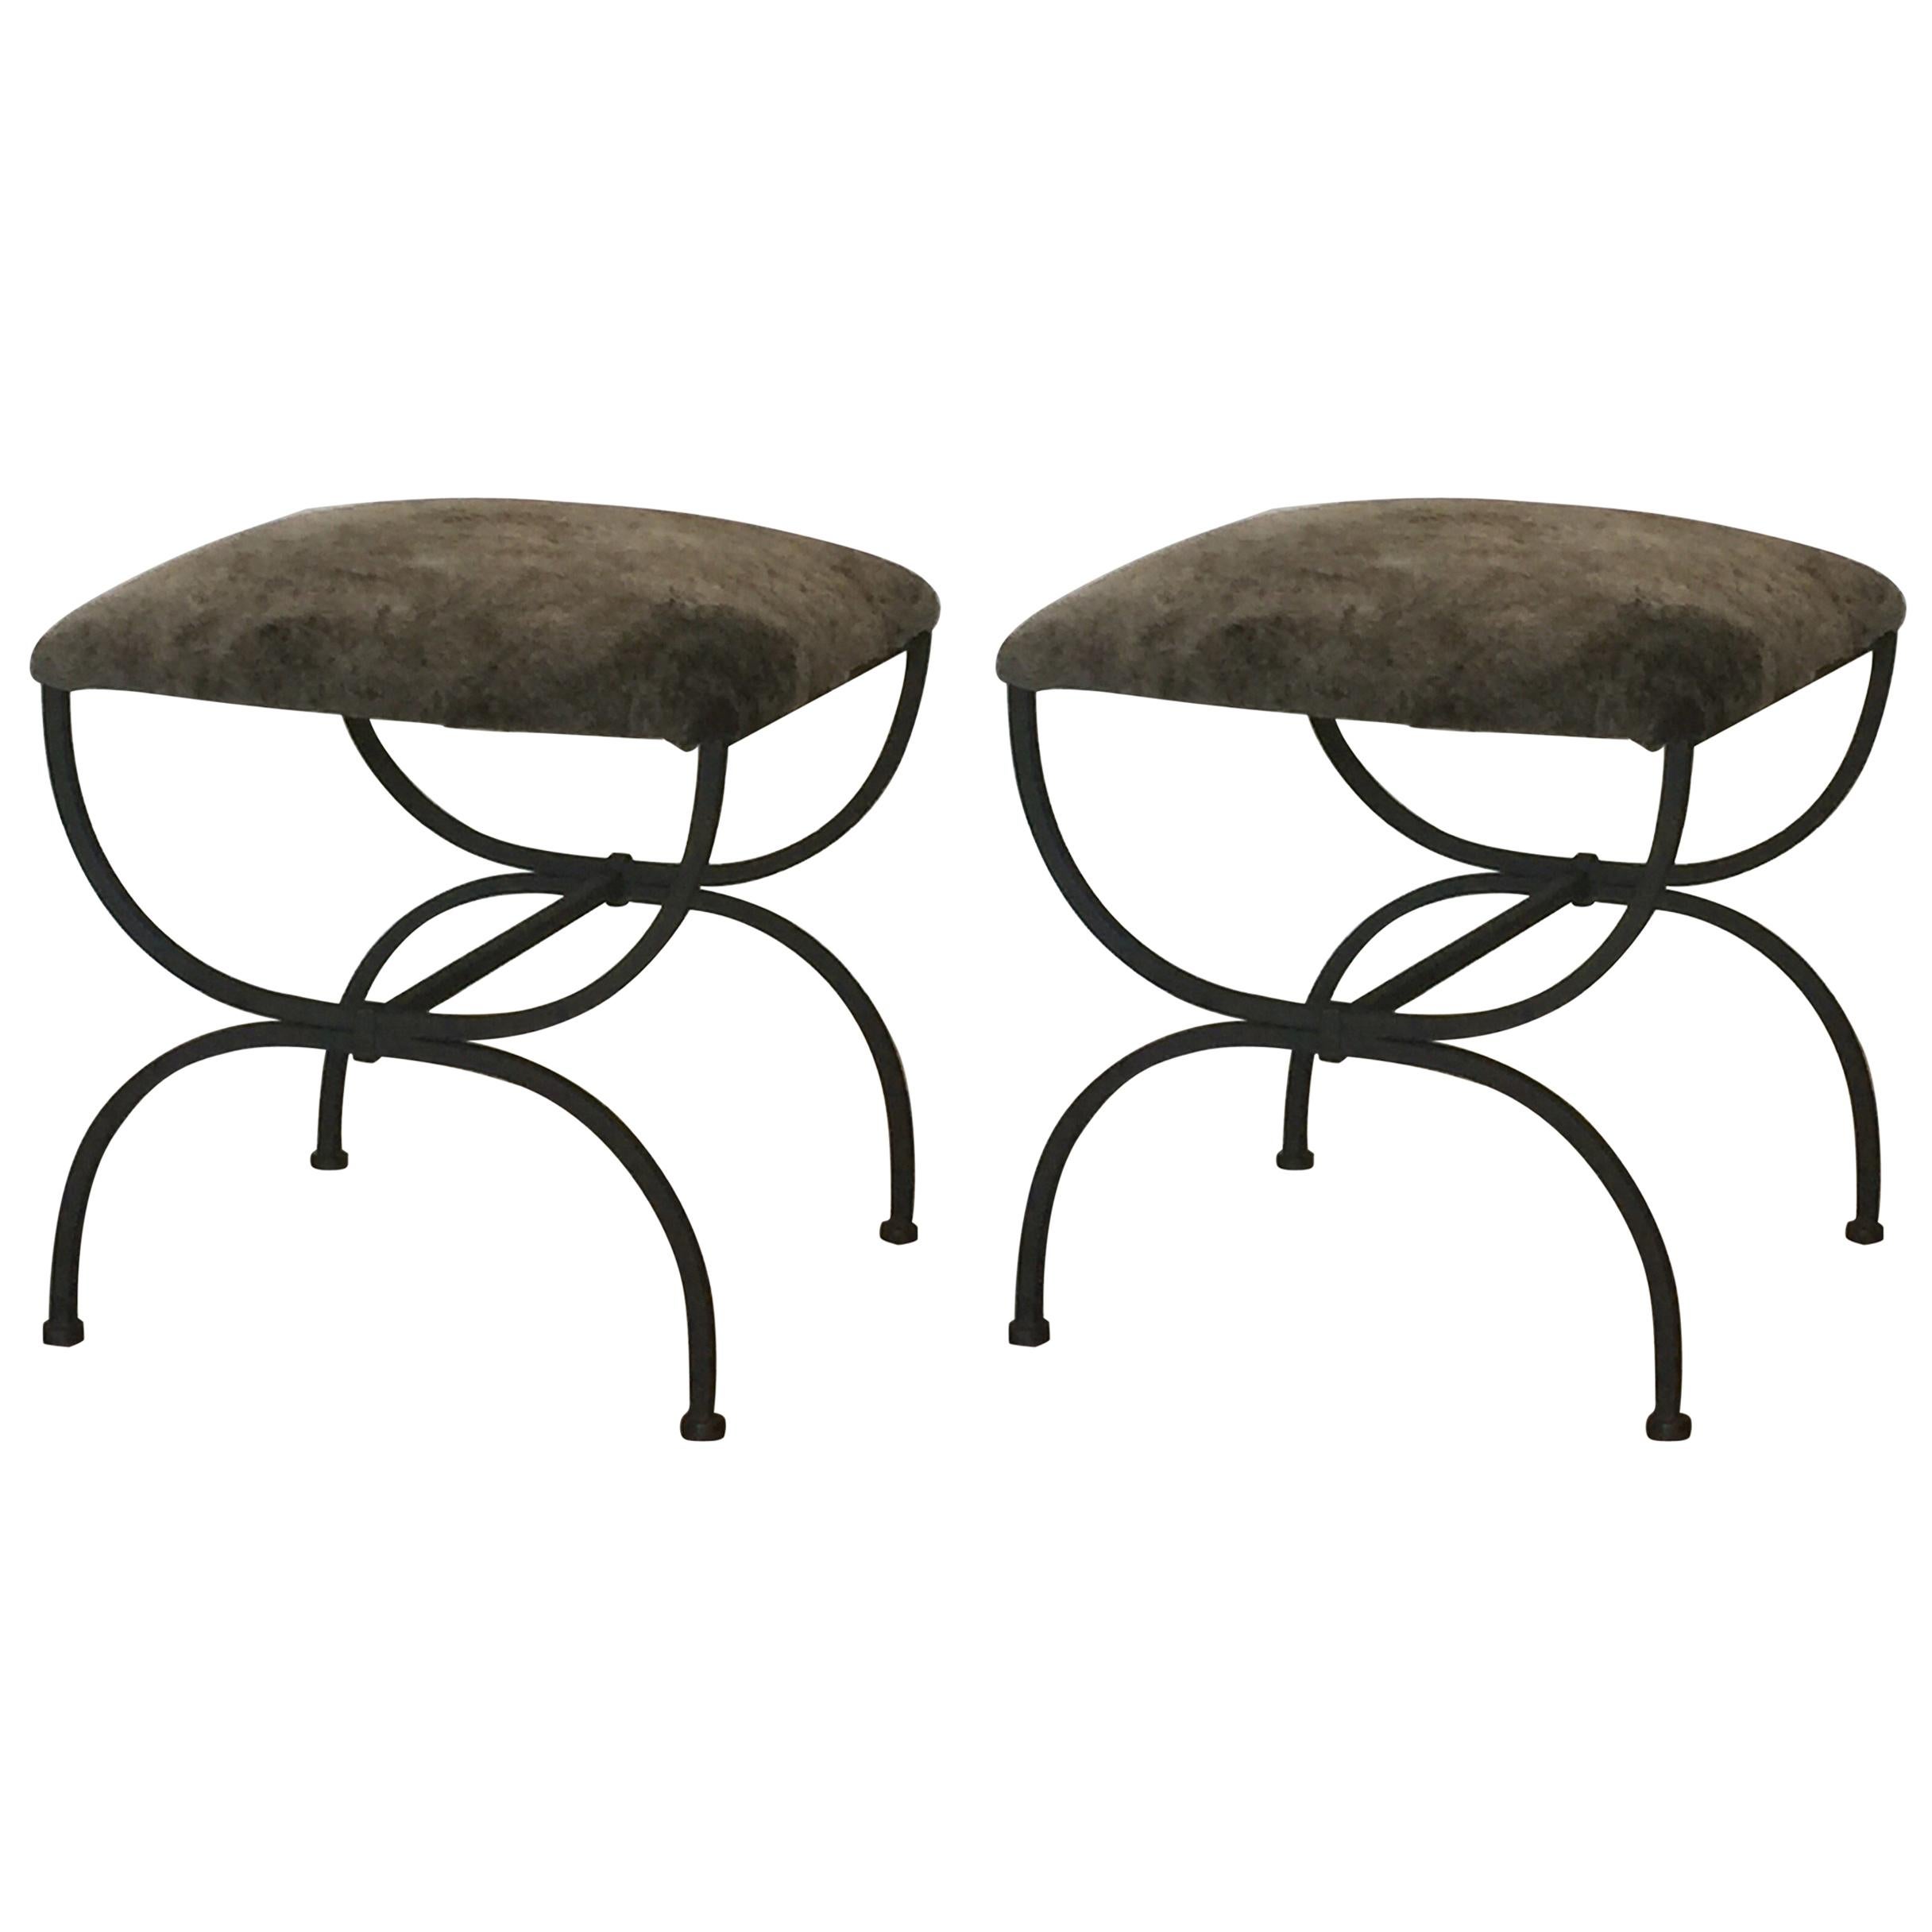 Pair of Gray Shearling 'Strapontin' Stools by Design Frères